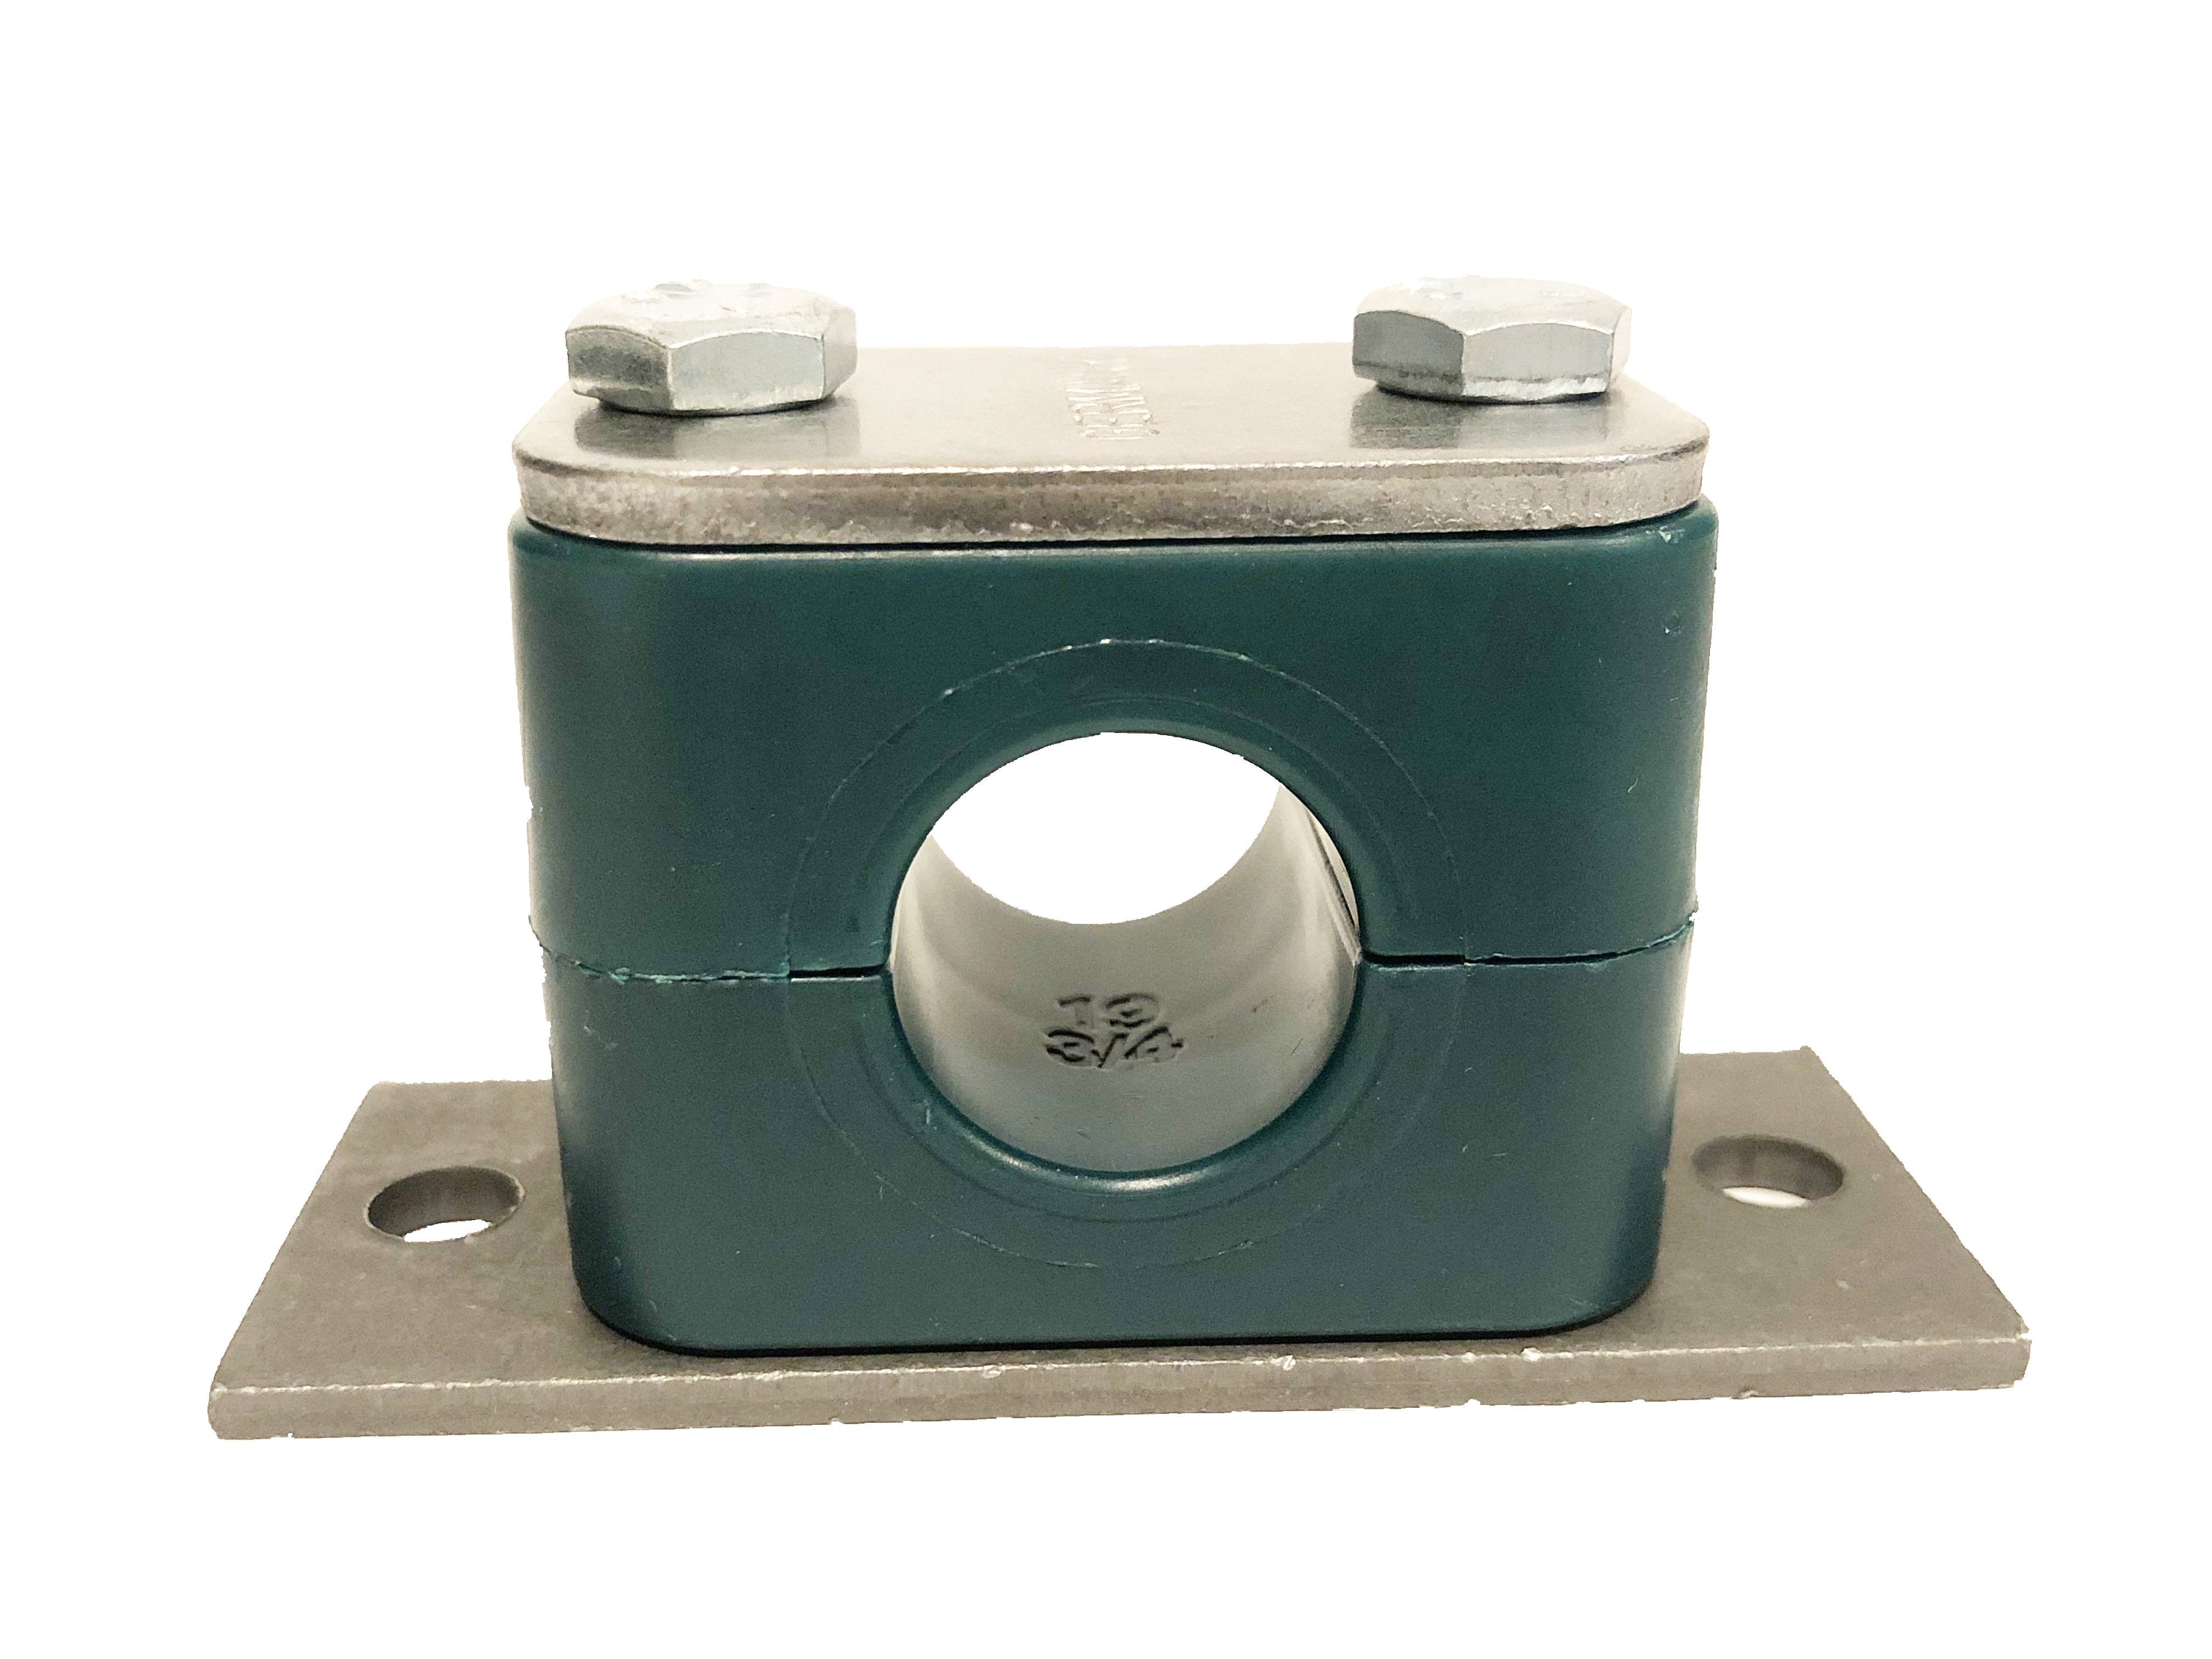 SPV-321.3-PP-H-DP-AS-U-W5 : Stauff Clamp, Elongated Weld Plate, 0.84" (21.3mm) OD, for 1/2" Pipe, Green PP Insert, Smooth Interior, 316SS